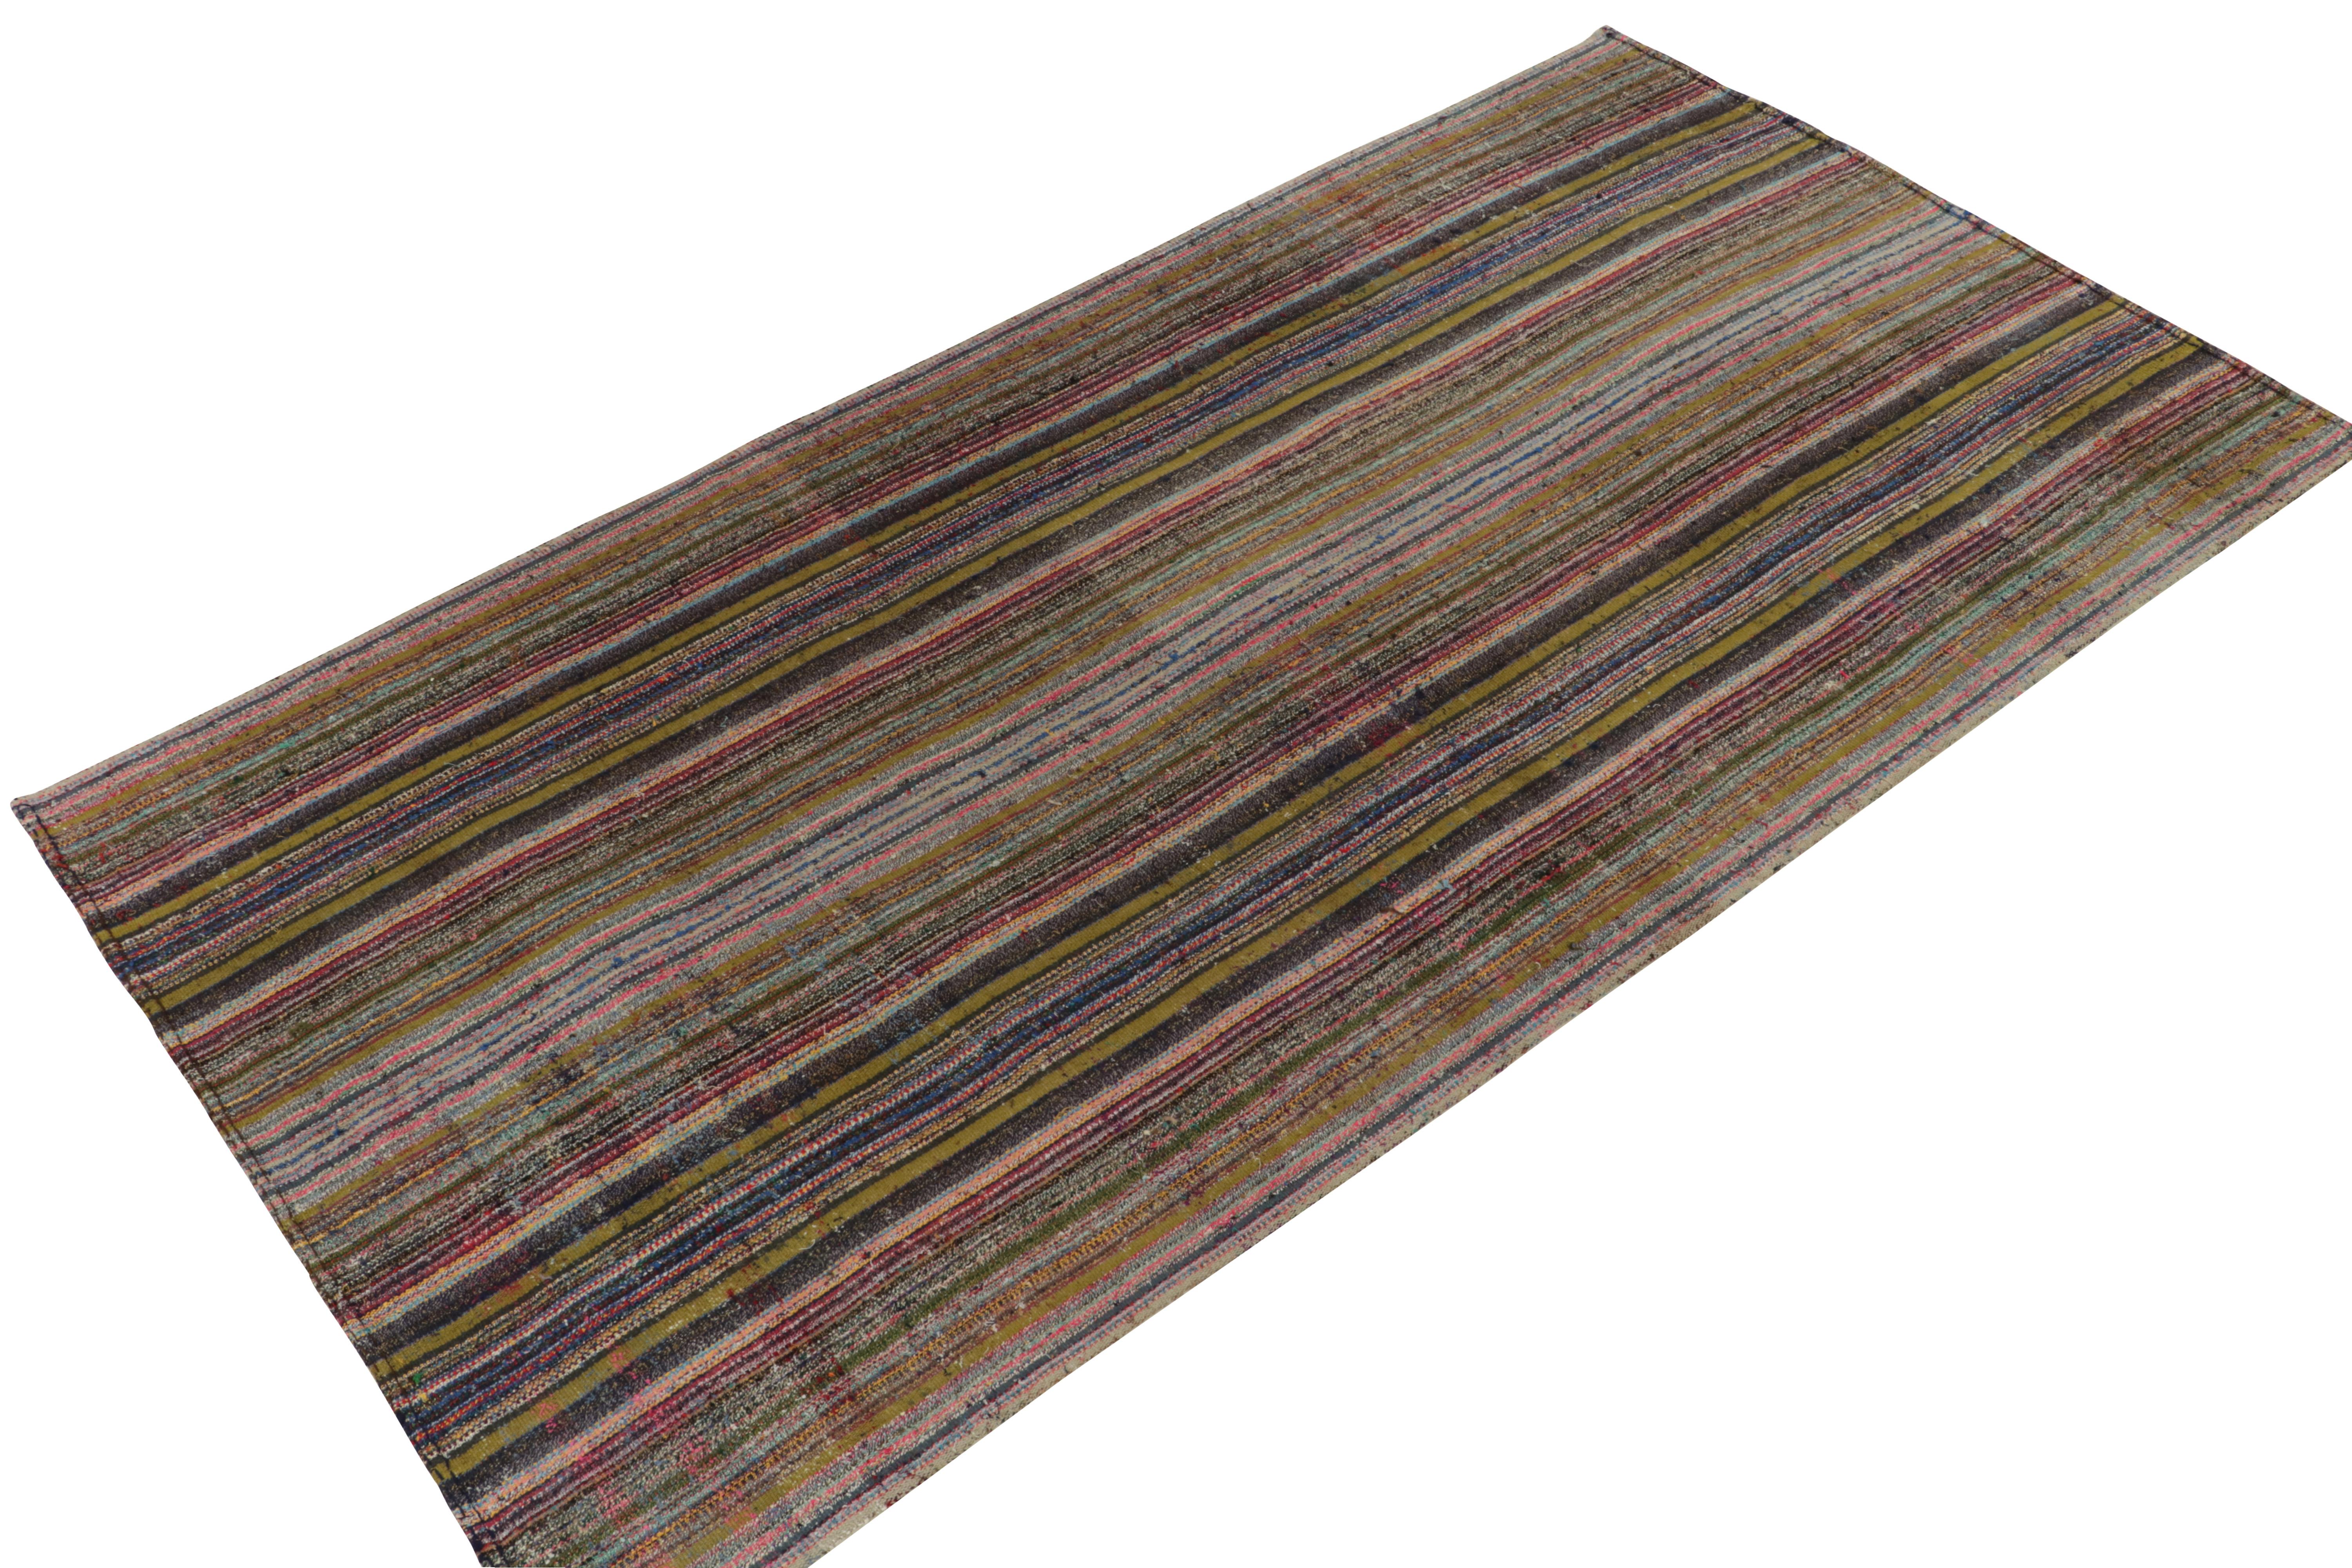 Mid-Century Modern 1950s Vintage Chaput Kilim in Green, Multicolor Stripe Patterns by Rug & Kilim For Sale